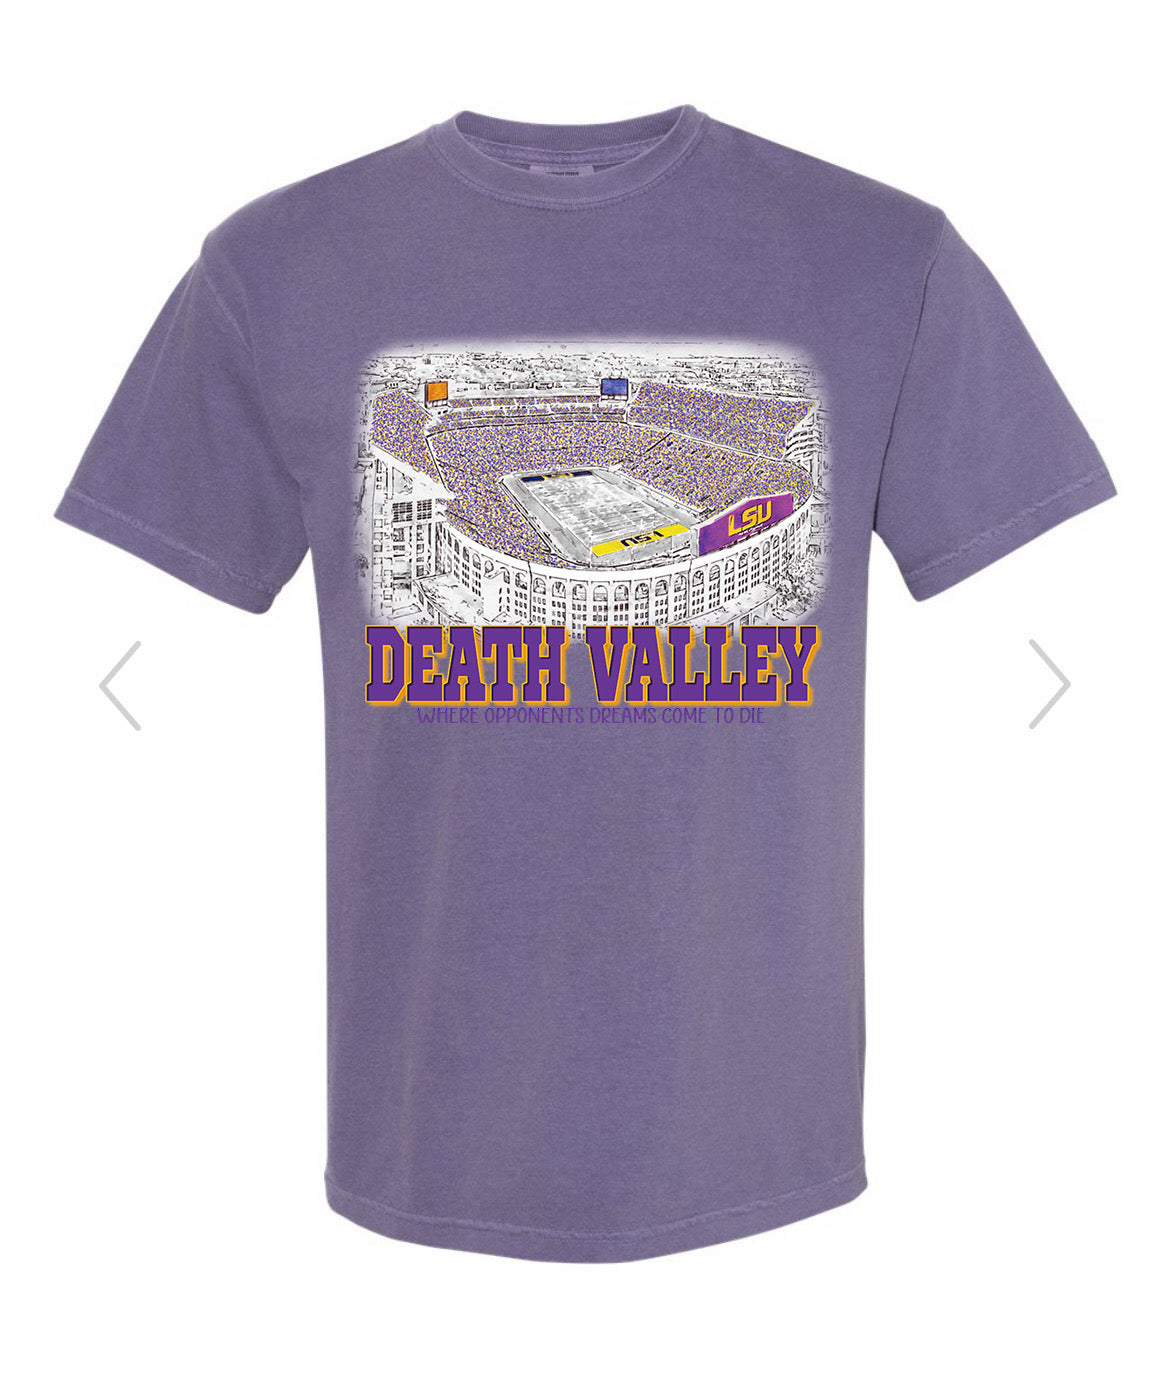 Death Valley.. WHERE OPPONENTS DREAMS COME TO DIE